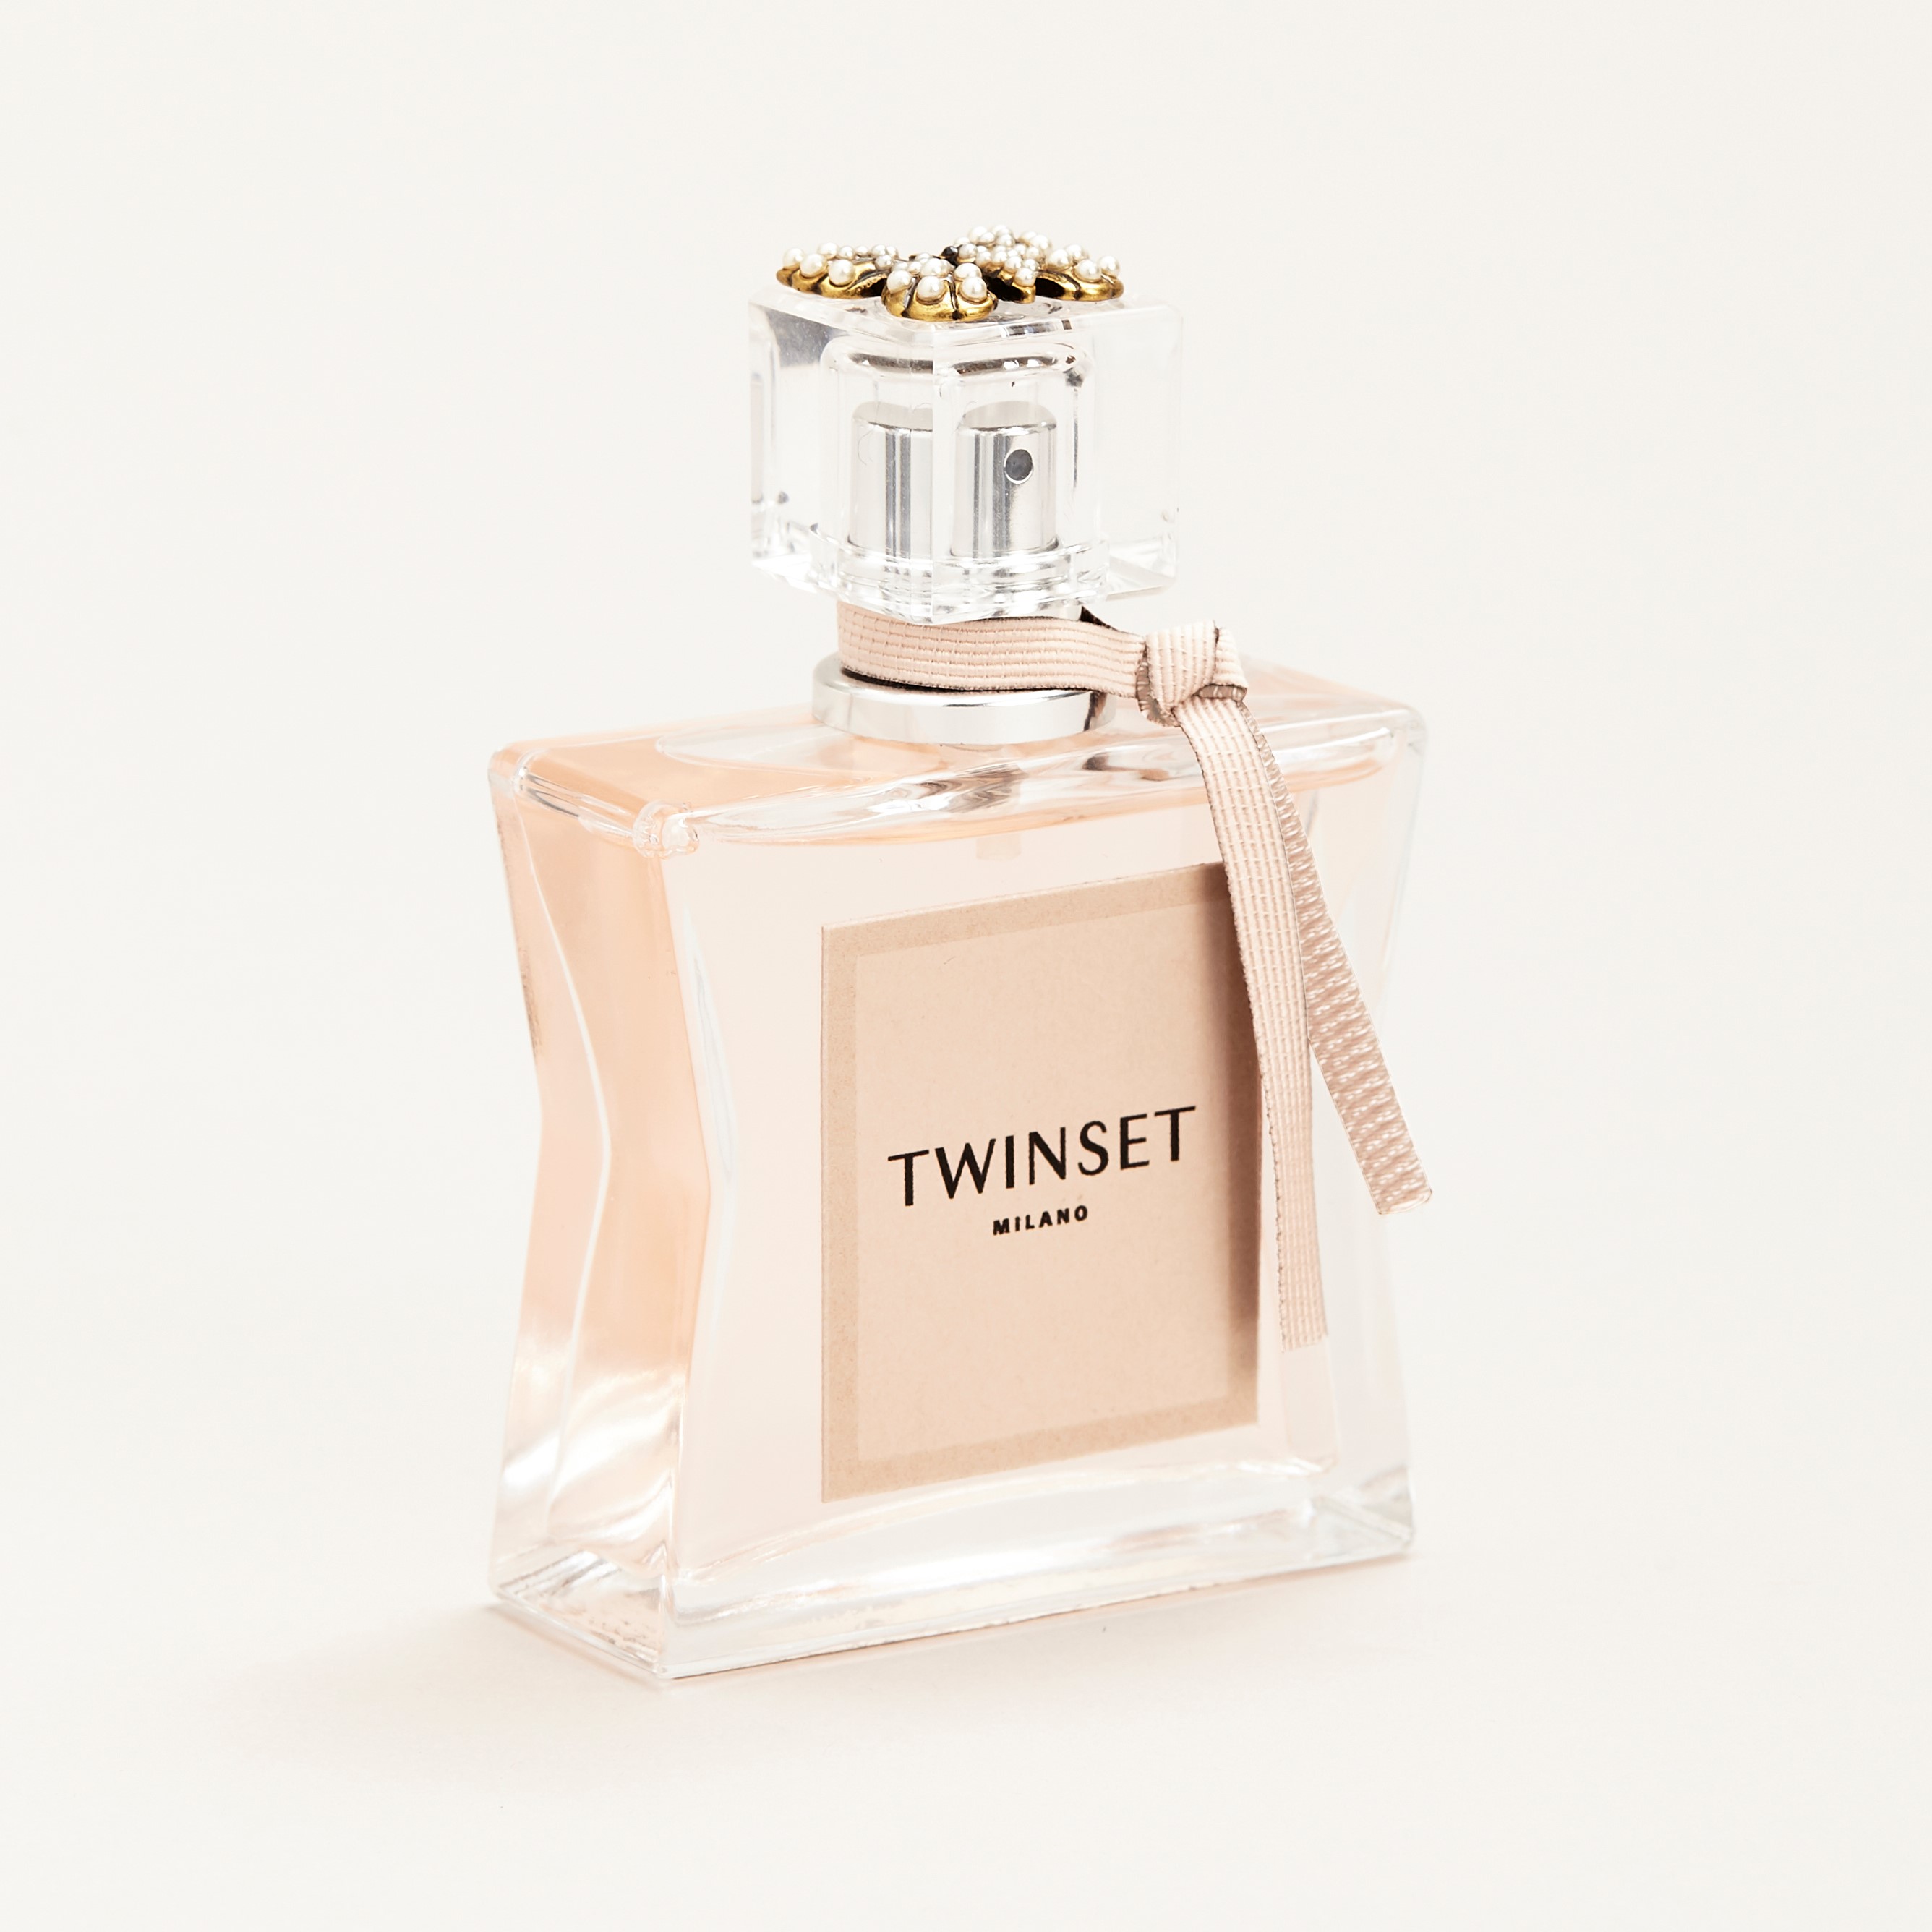 Twinset Twinset Milano perfume - a fragrance for women 2019